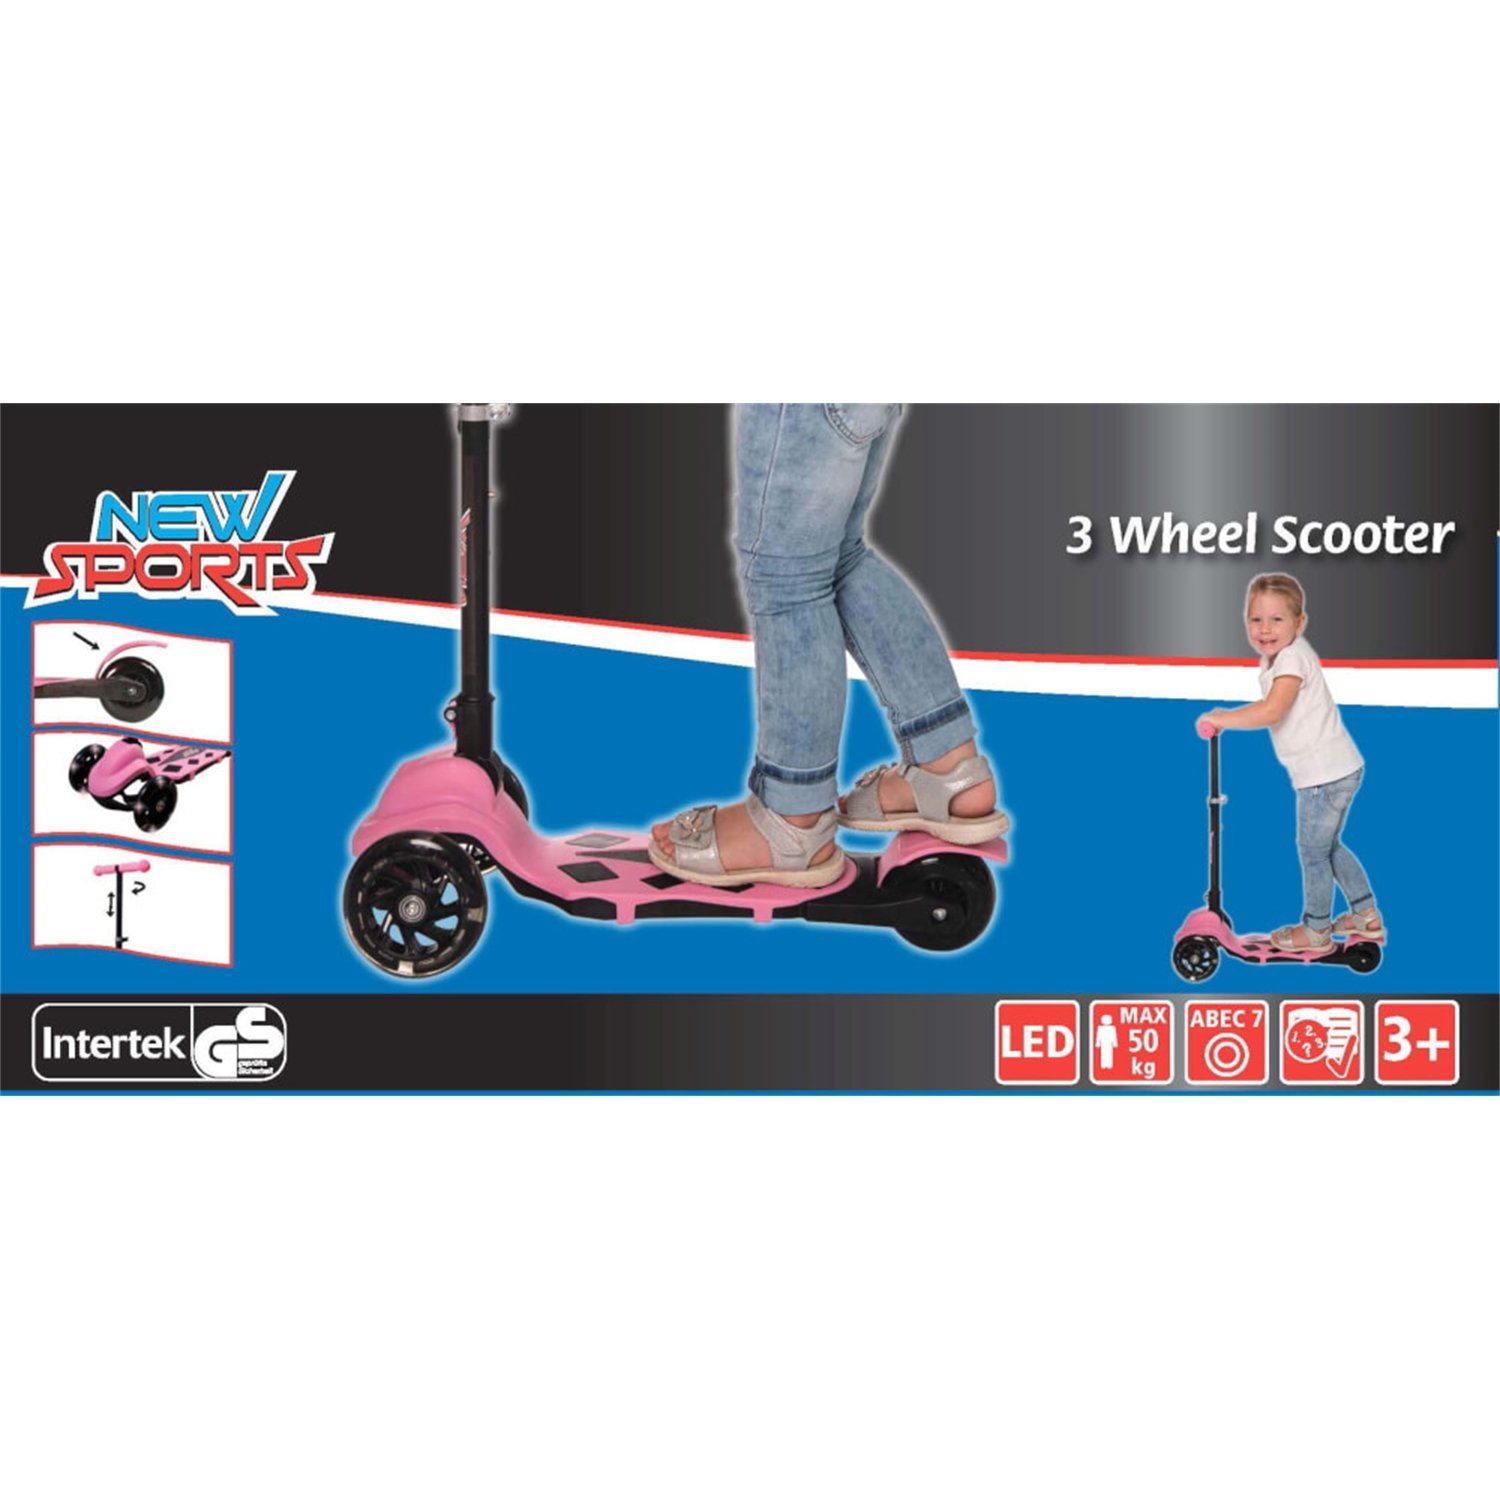 klappbar, mm Vedes New Sports Scooter 3-Wheel Scooter Rosa, 110 73422019